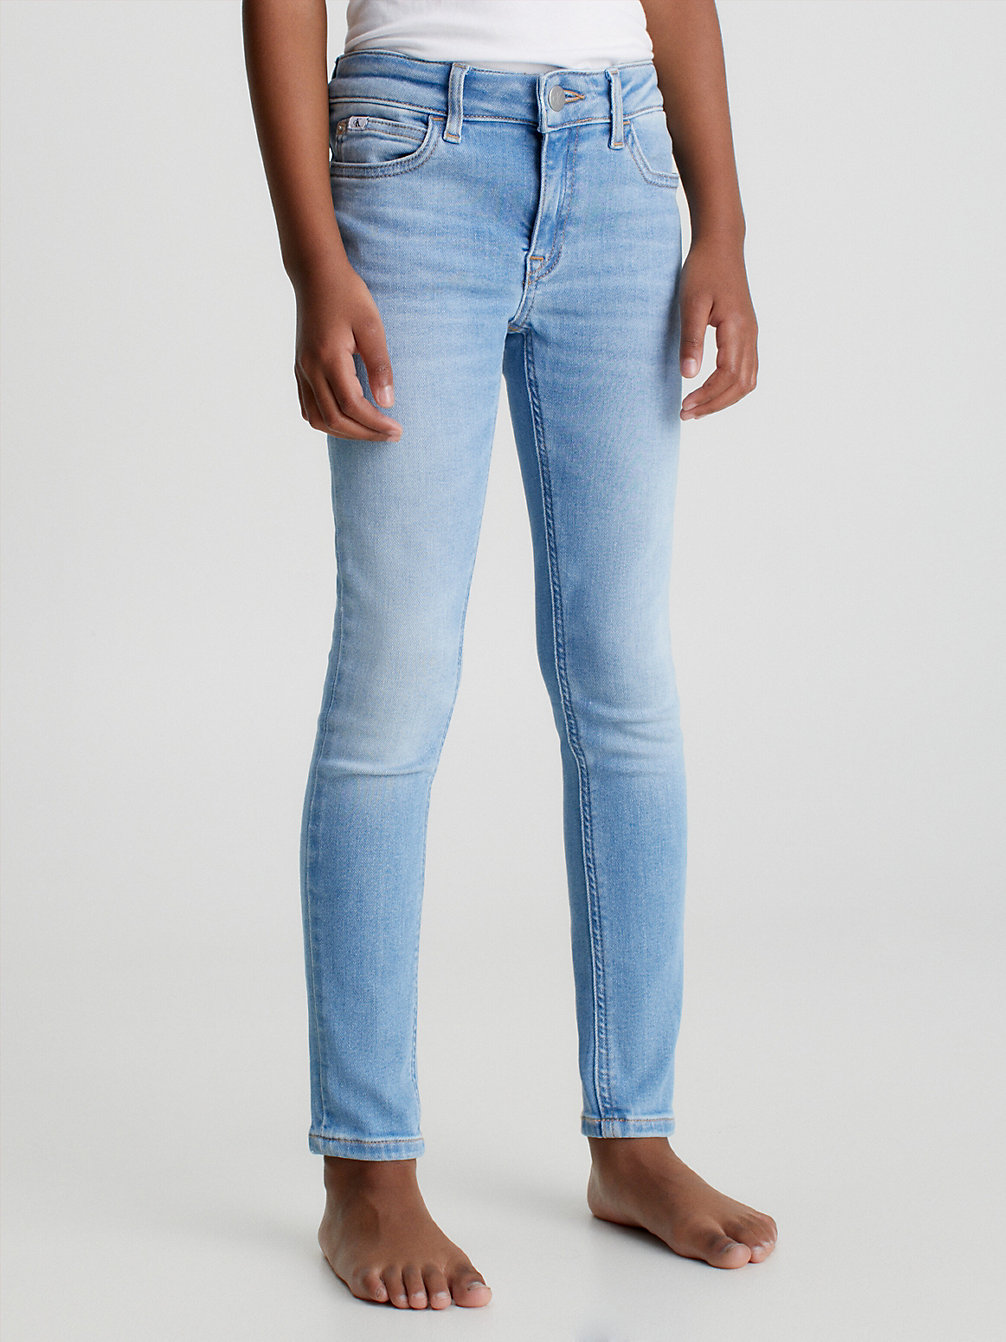 ESS MID BLUE Mid Rise Skinny Jeans undefined girls Calvin Klein